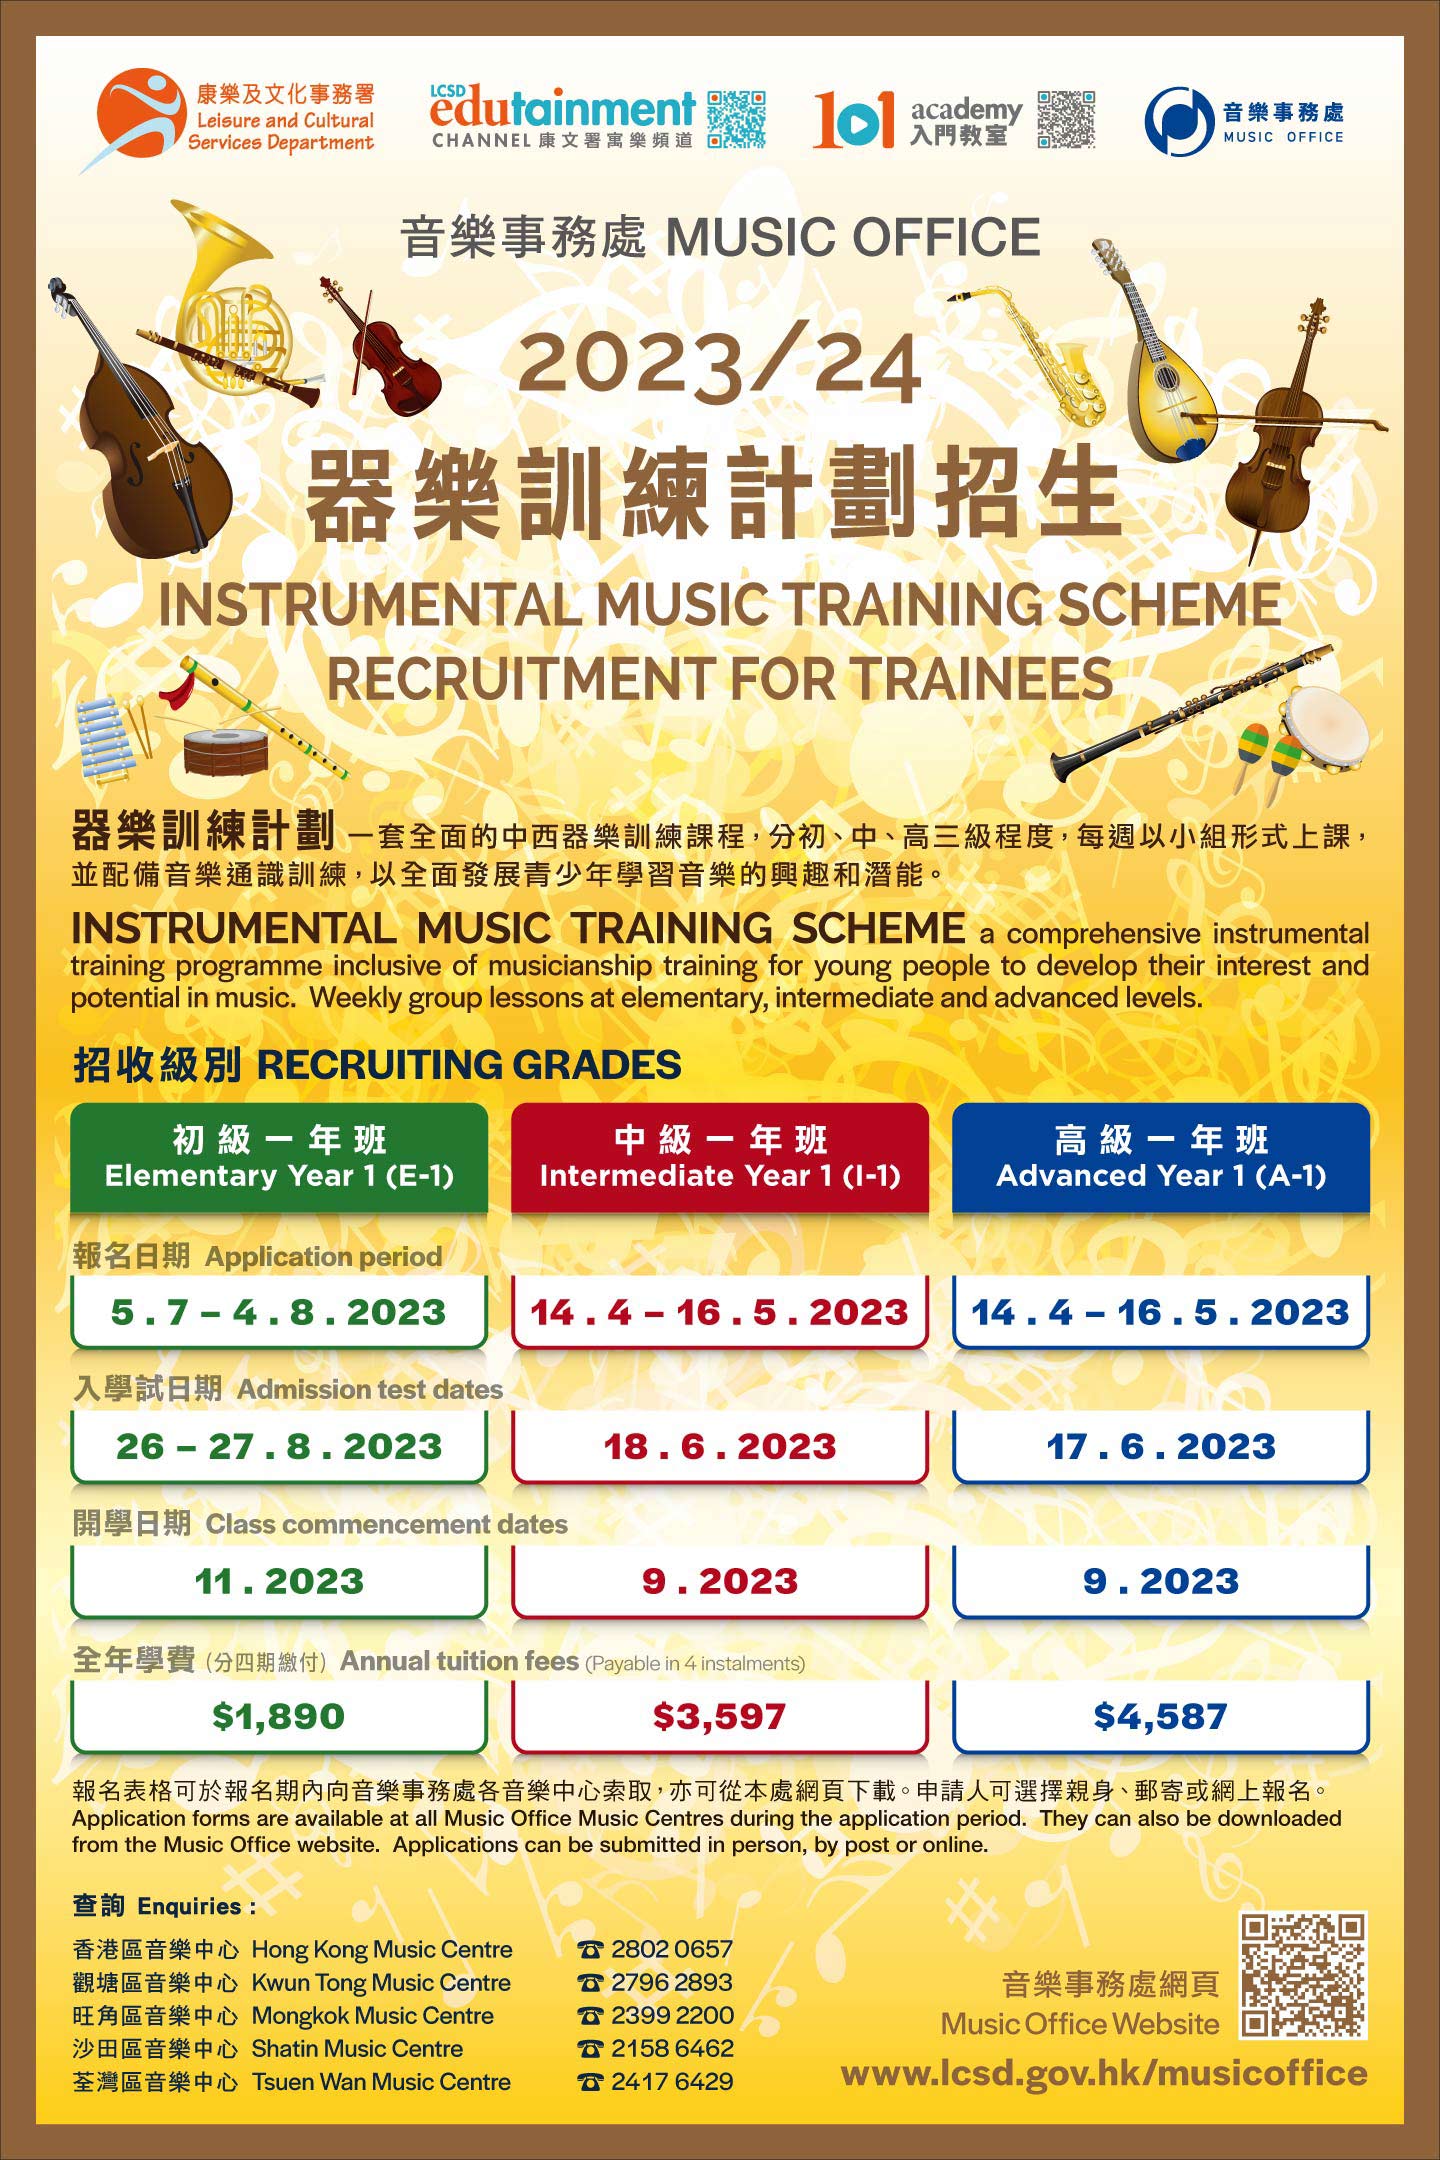 Recruitment for 2023/24 Instrumental Music Training Scheme Intermediate Year One (I-1) & Advanced Year One (A-1) Courses